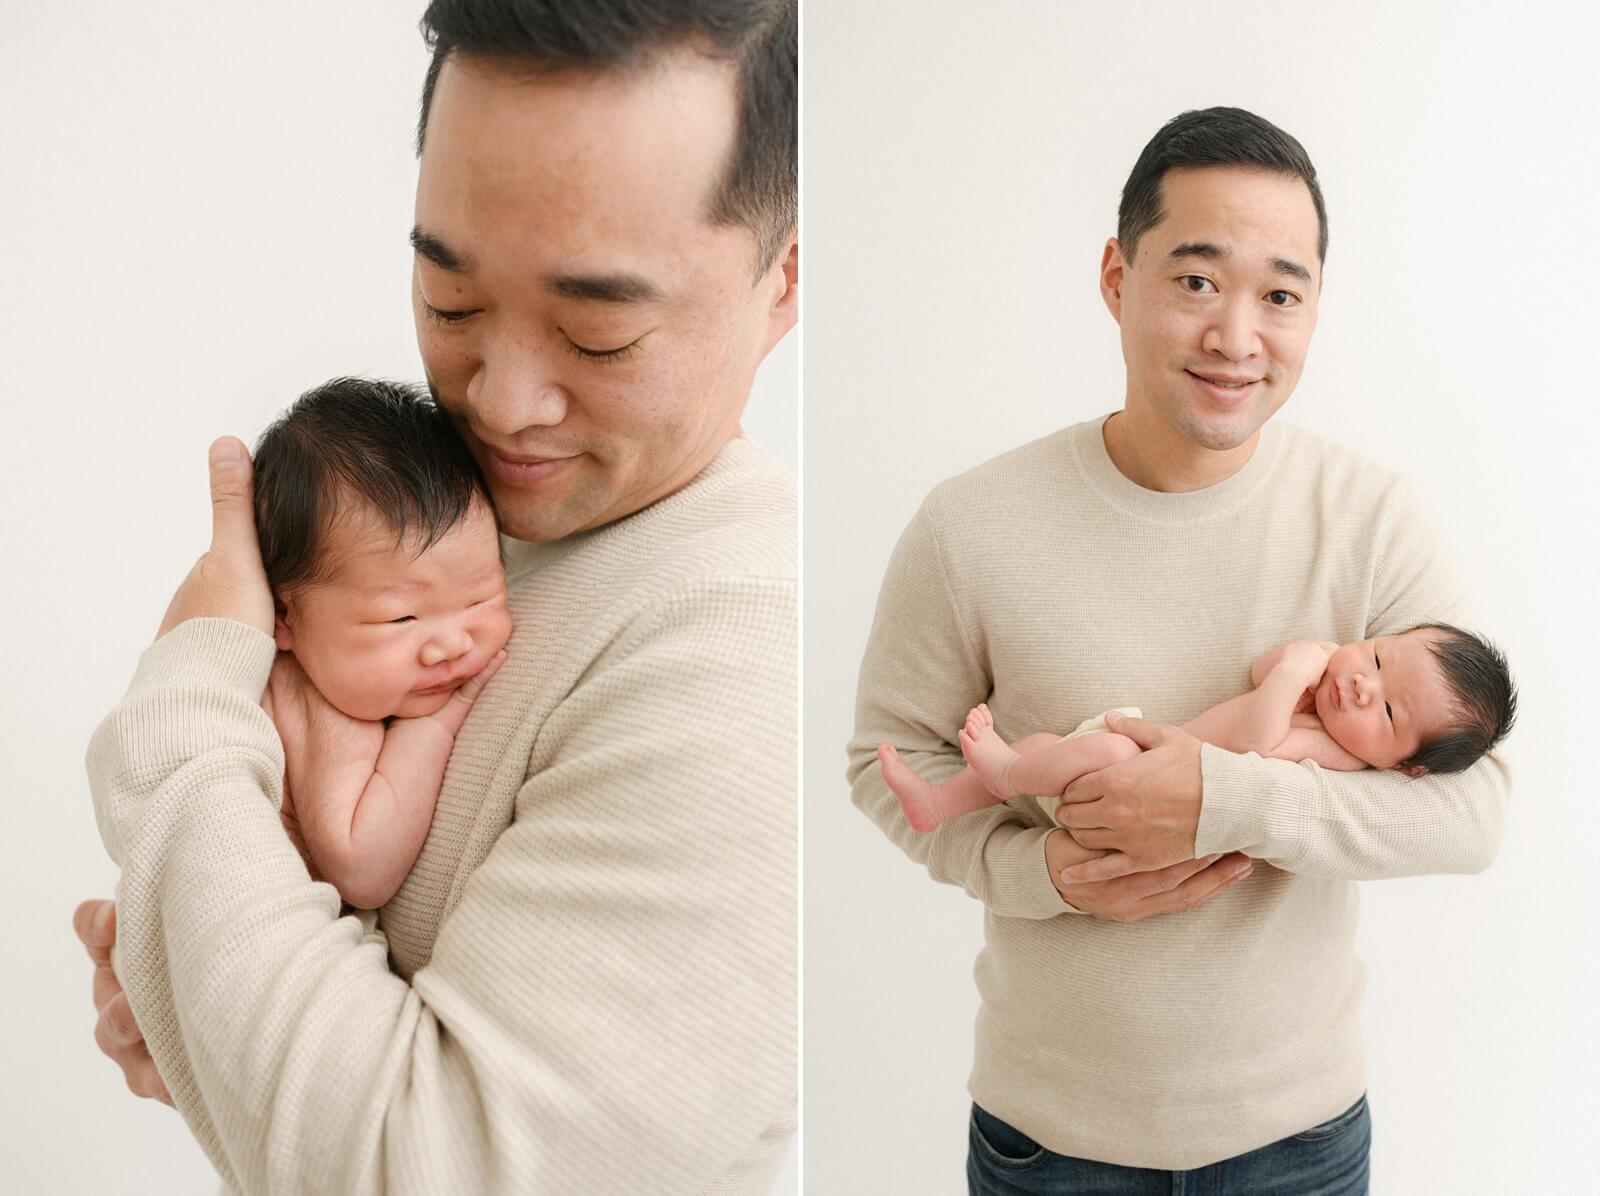 What should dads wear for newborn photos